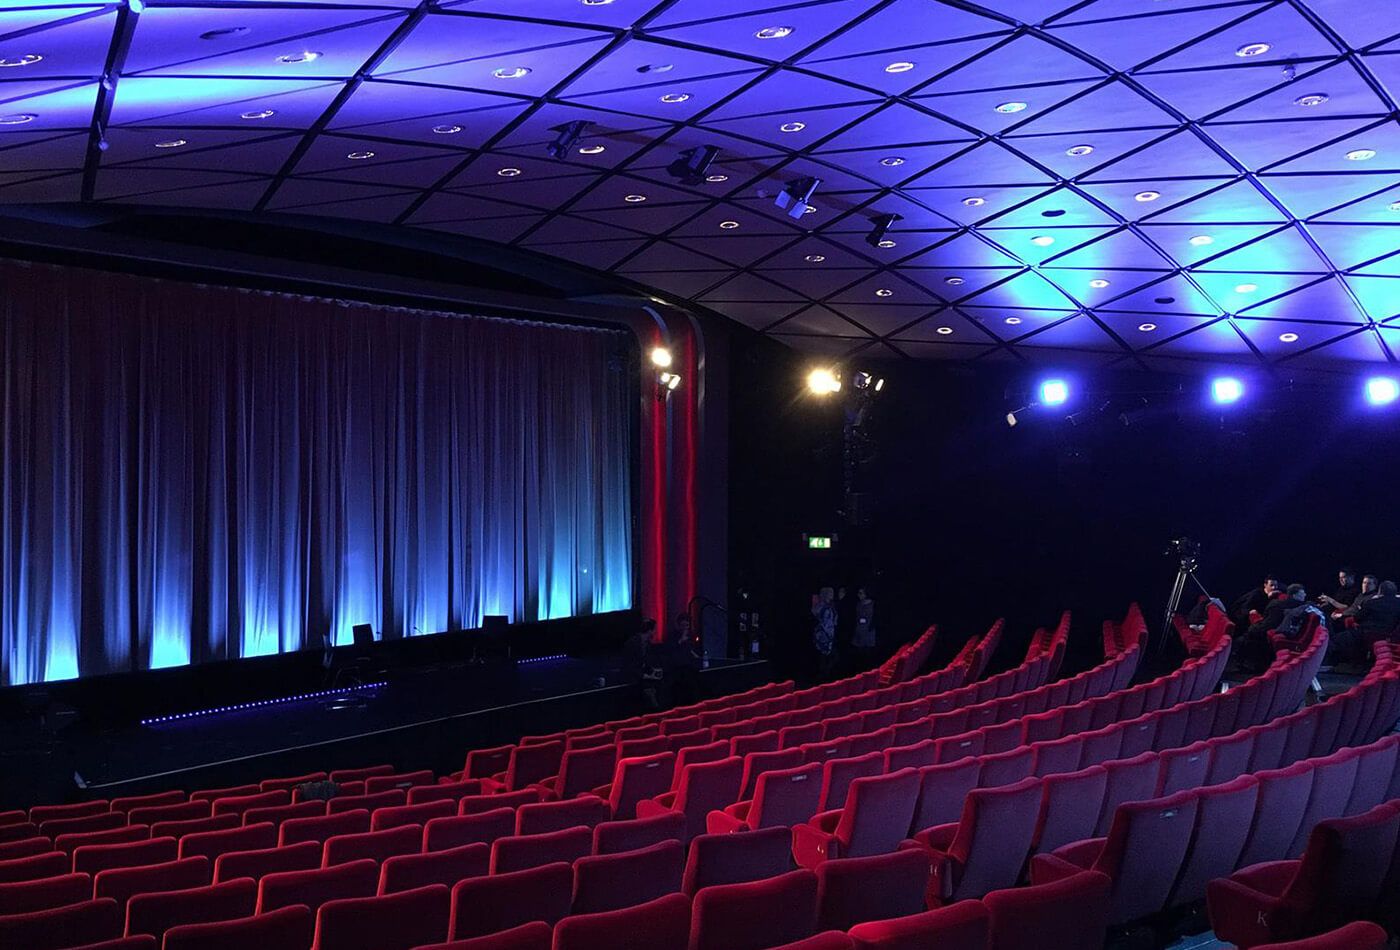 Interior shot of red velvet seats and stage lit up in blue